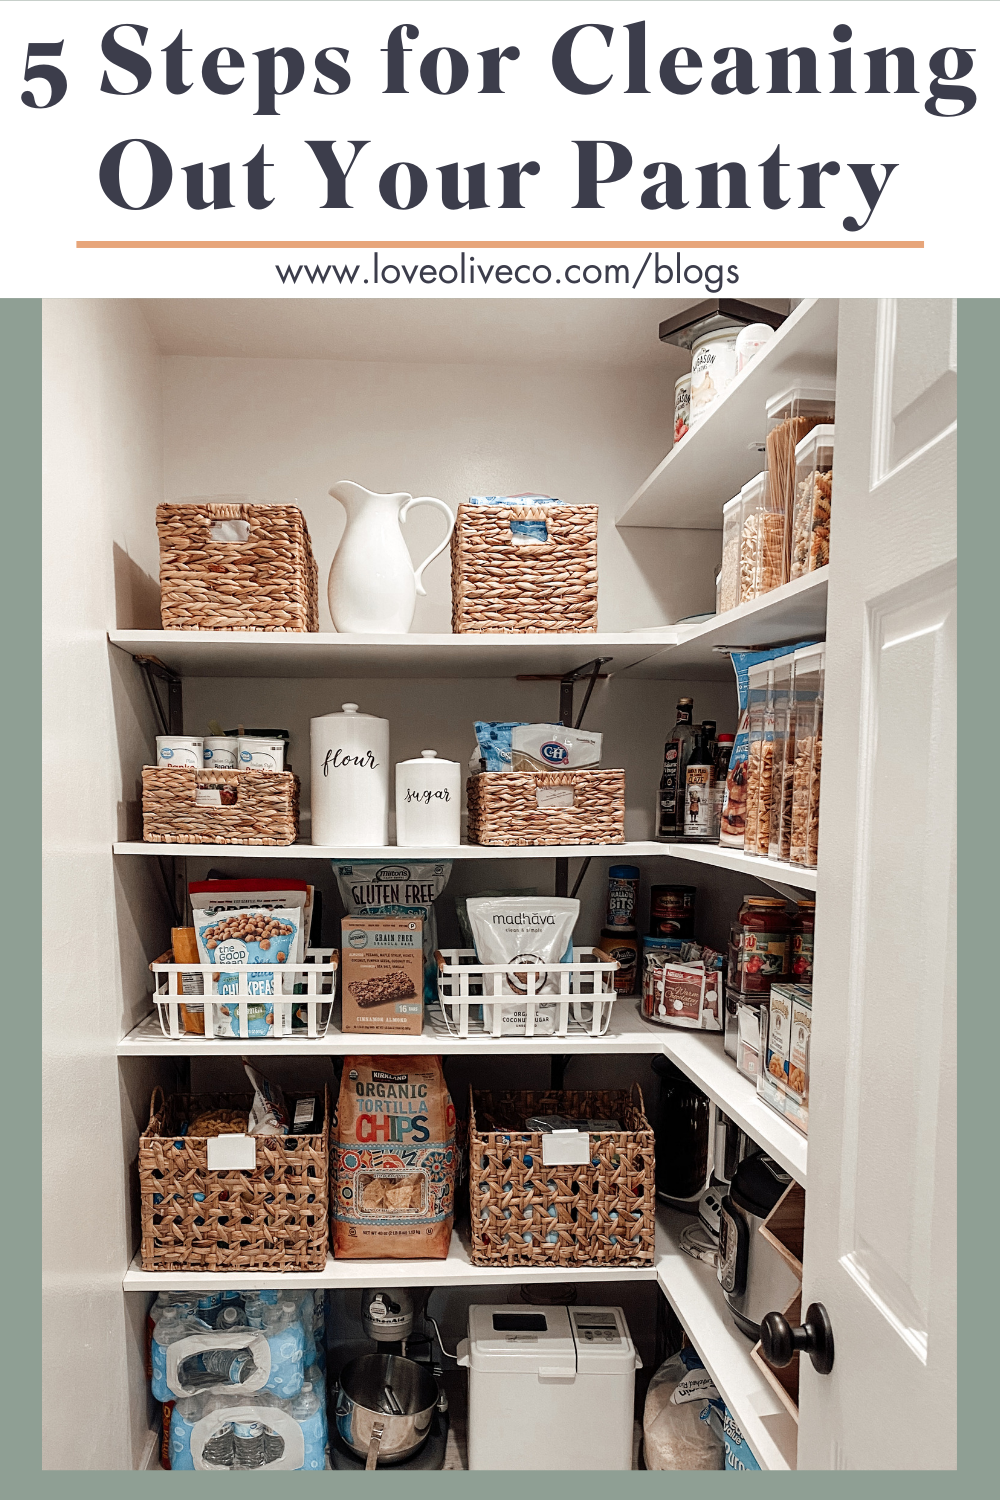 5 Steps for Cleaning Out Your Pantry from Love Olive Co. www.loveoliveco.com